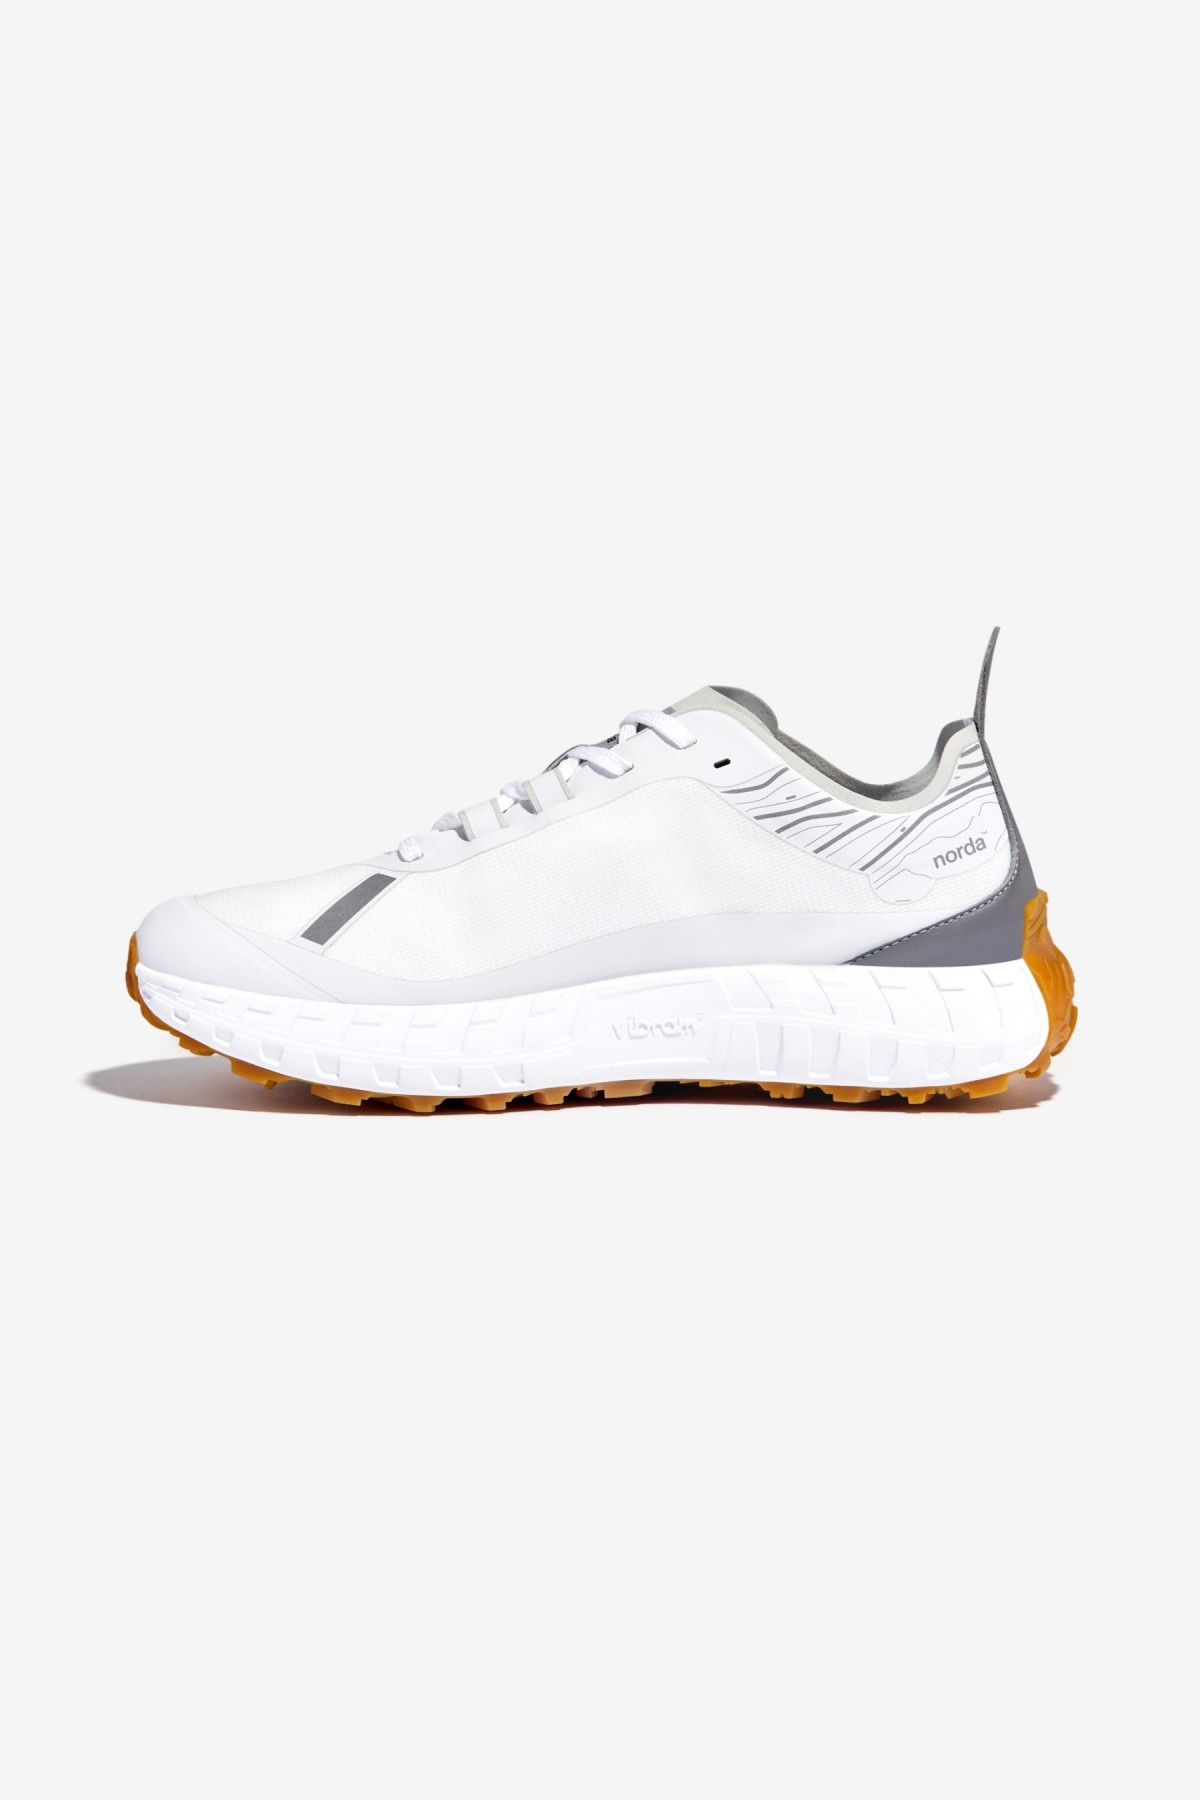 Norda 001 Trail Shoes in White/Gum